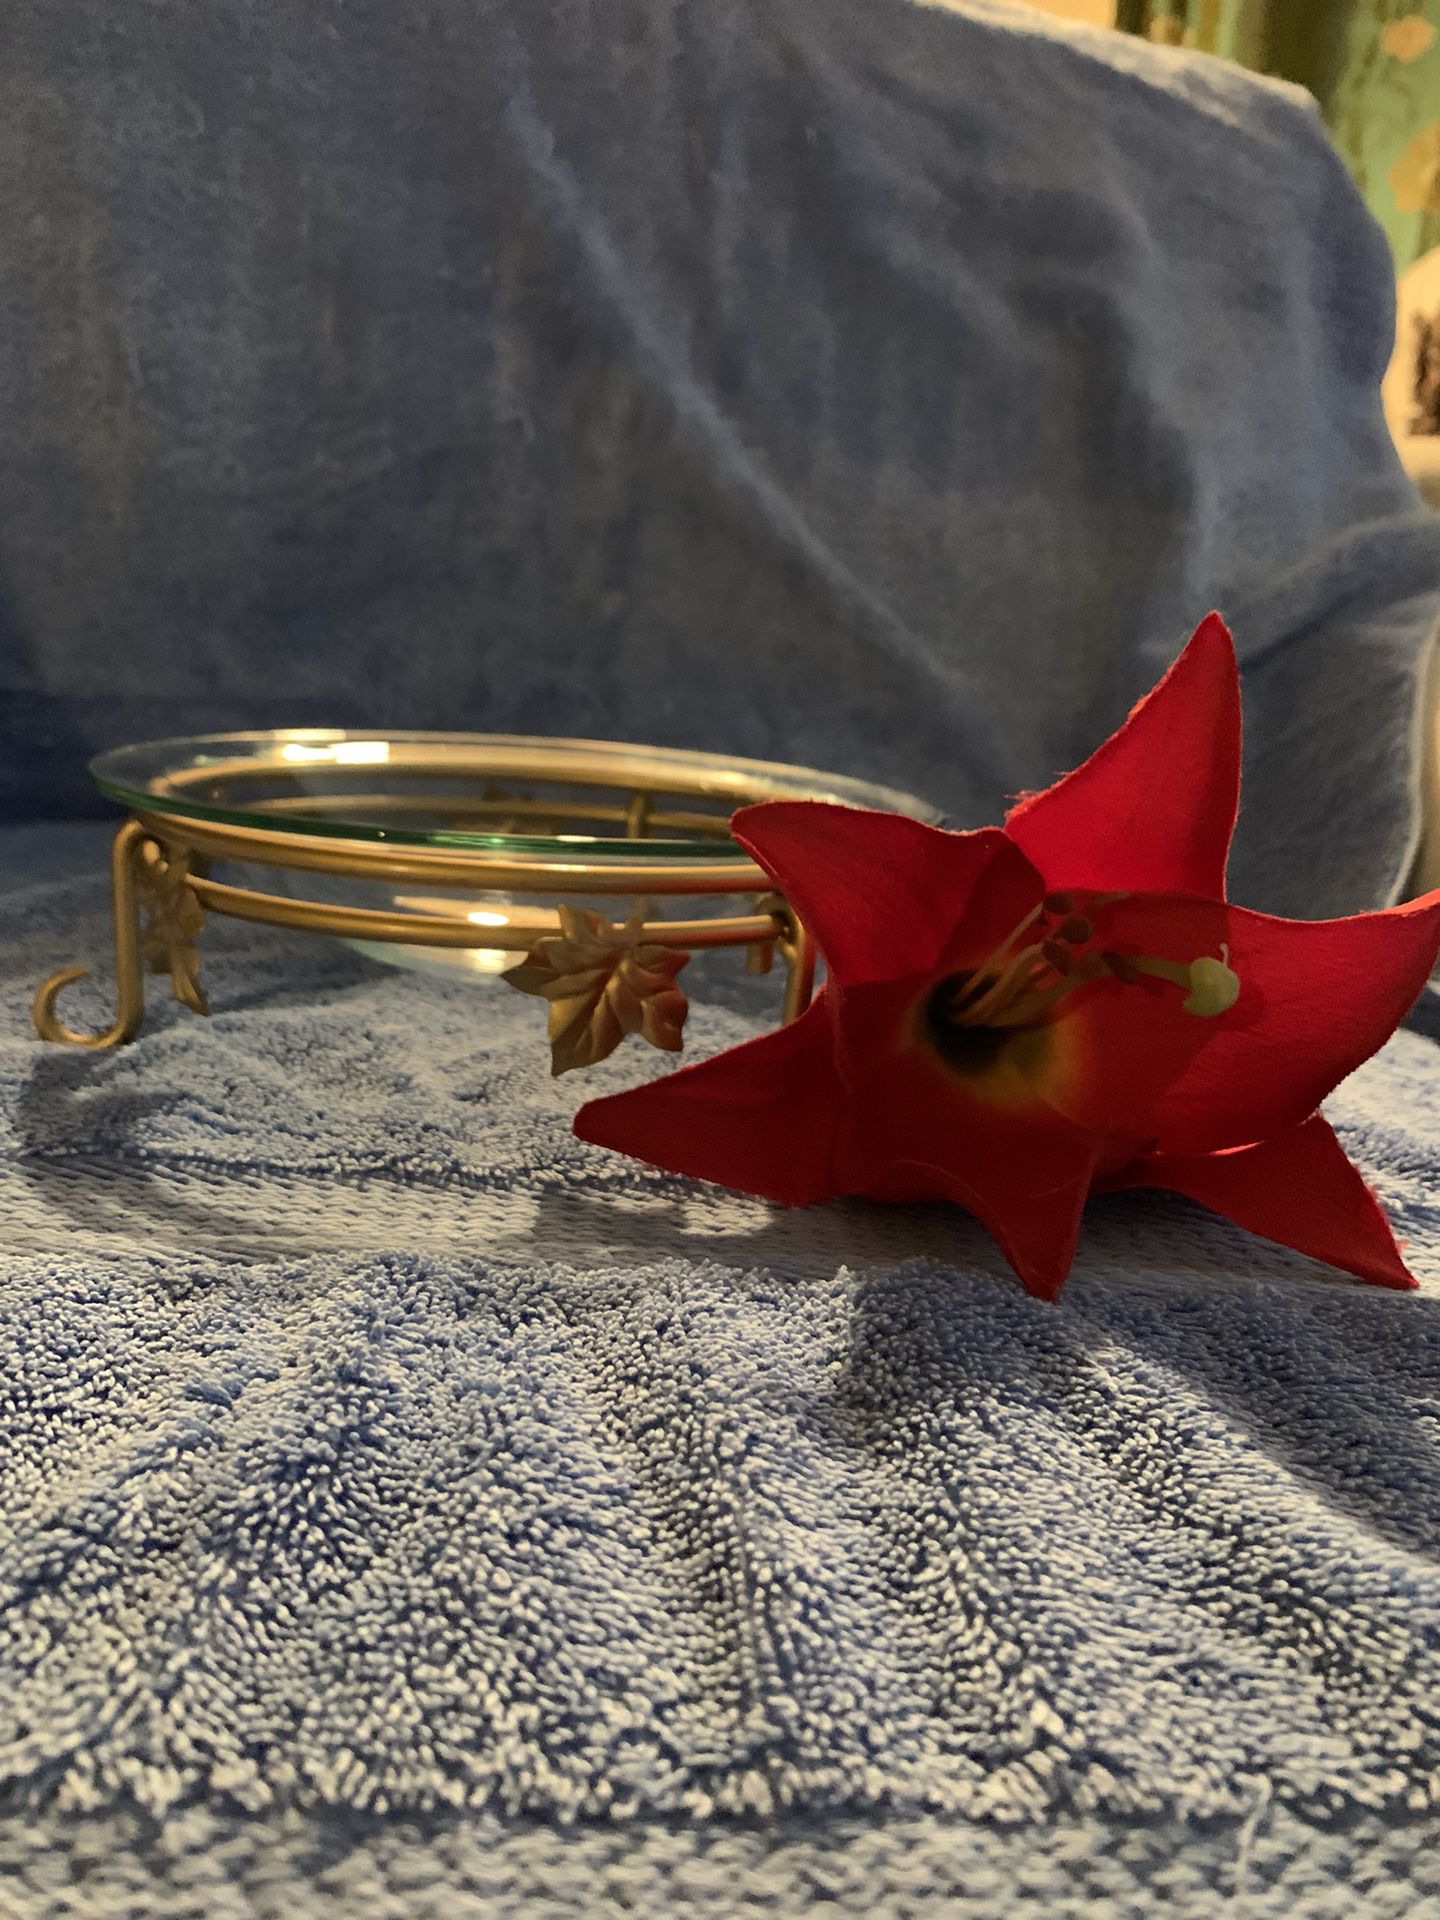 Flared Edged Glass Bowl With Gold Metal Stand